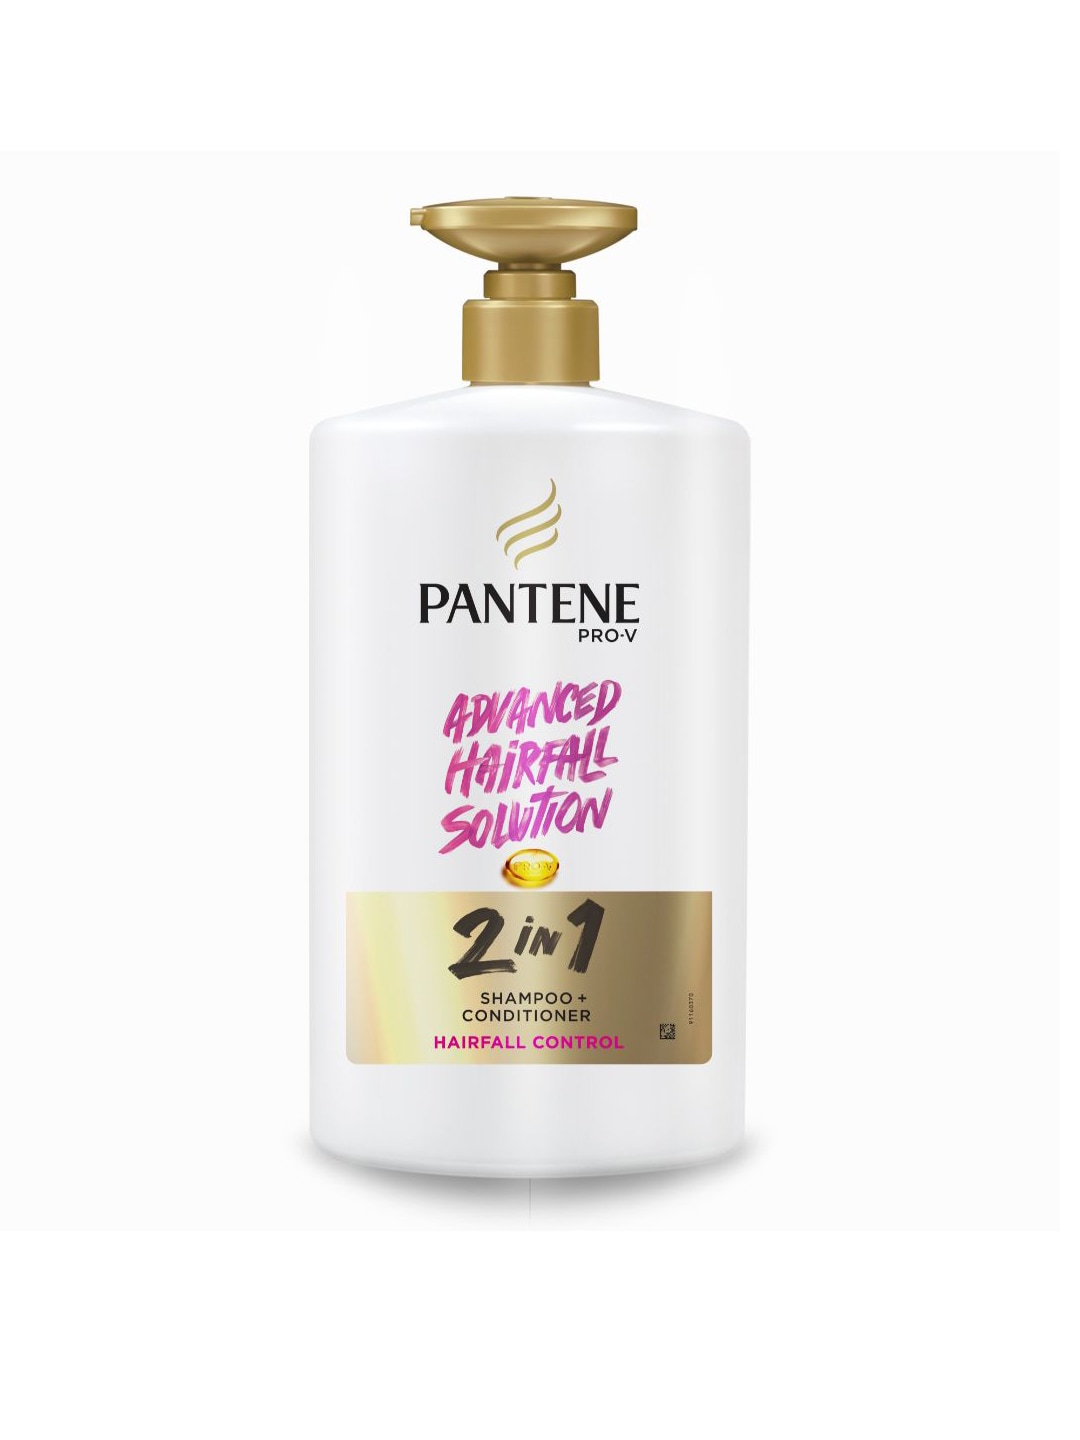 Pantene 2 in 1 Hairfall Control Shampoo + Conditioner 1 L Price in India